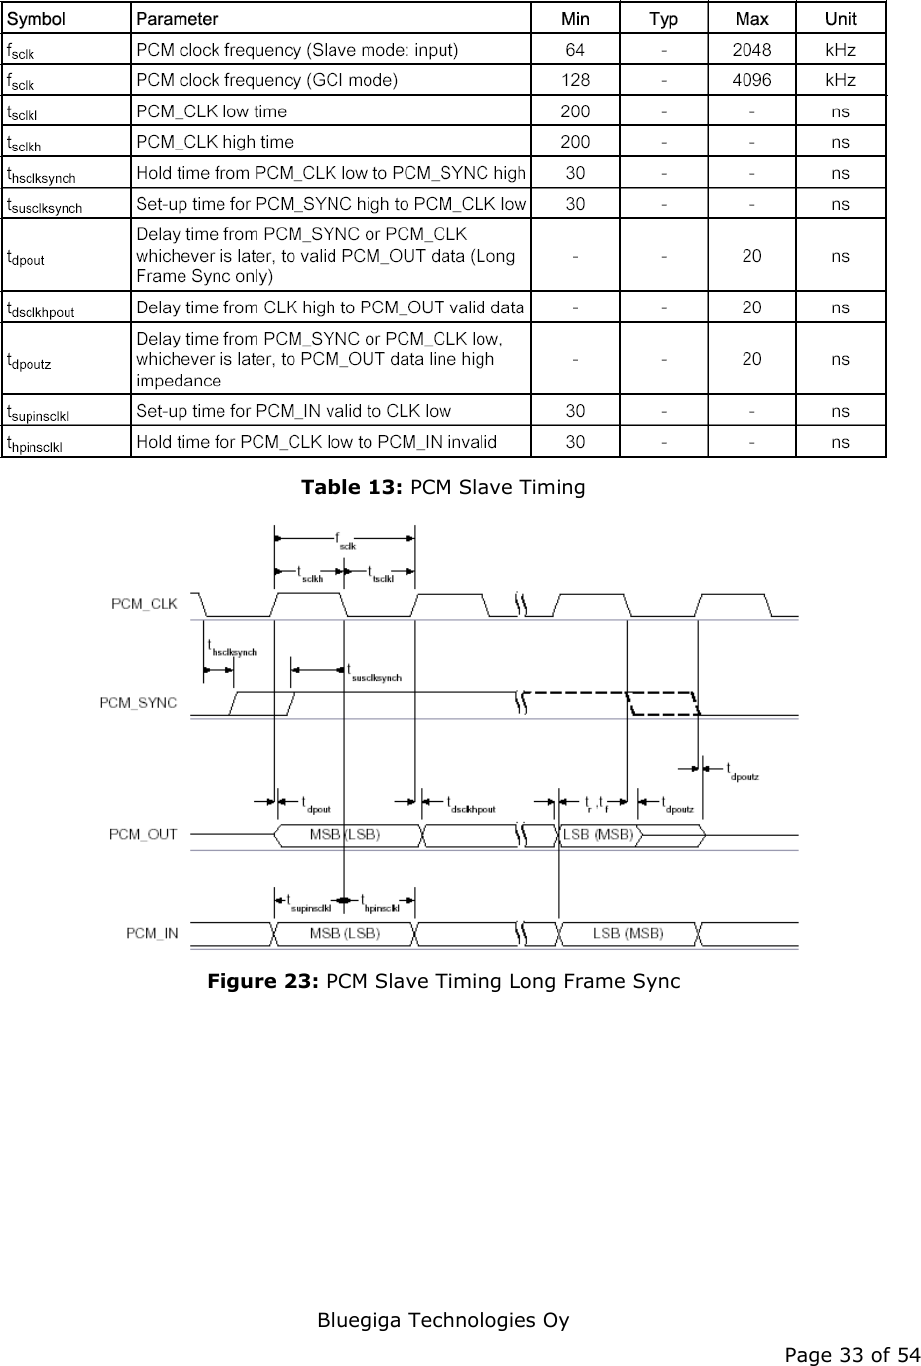   Bluegiga Technologies Oy Page 33 of 54  Table 13: PCM Slave Timing  Figure 23: PCM Slave Timing Long Frame Sync 